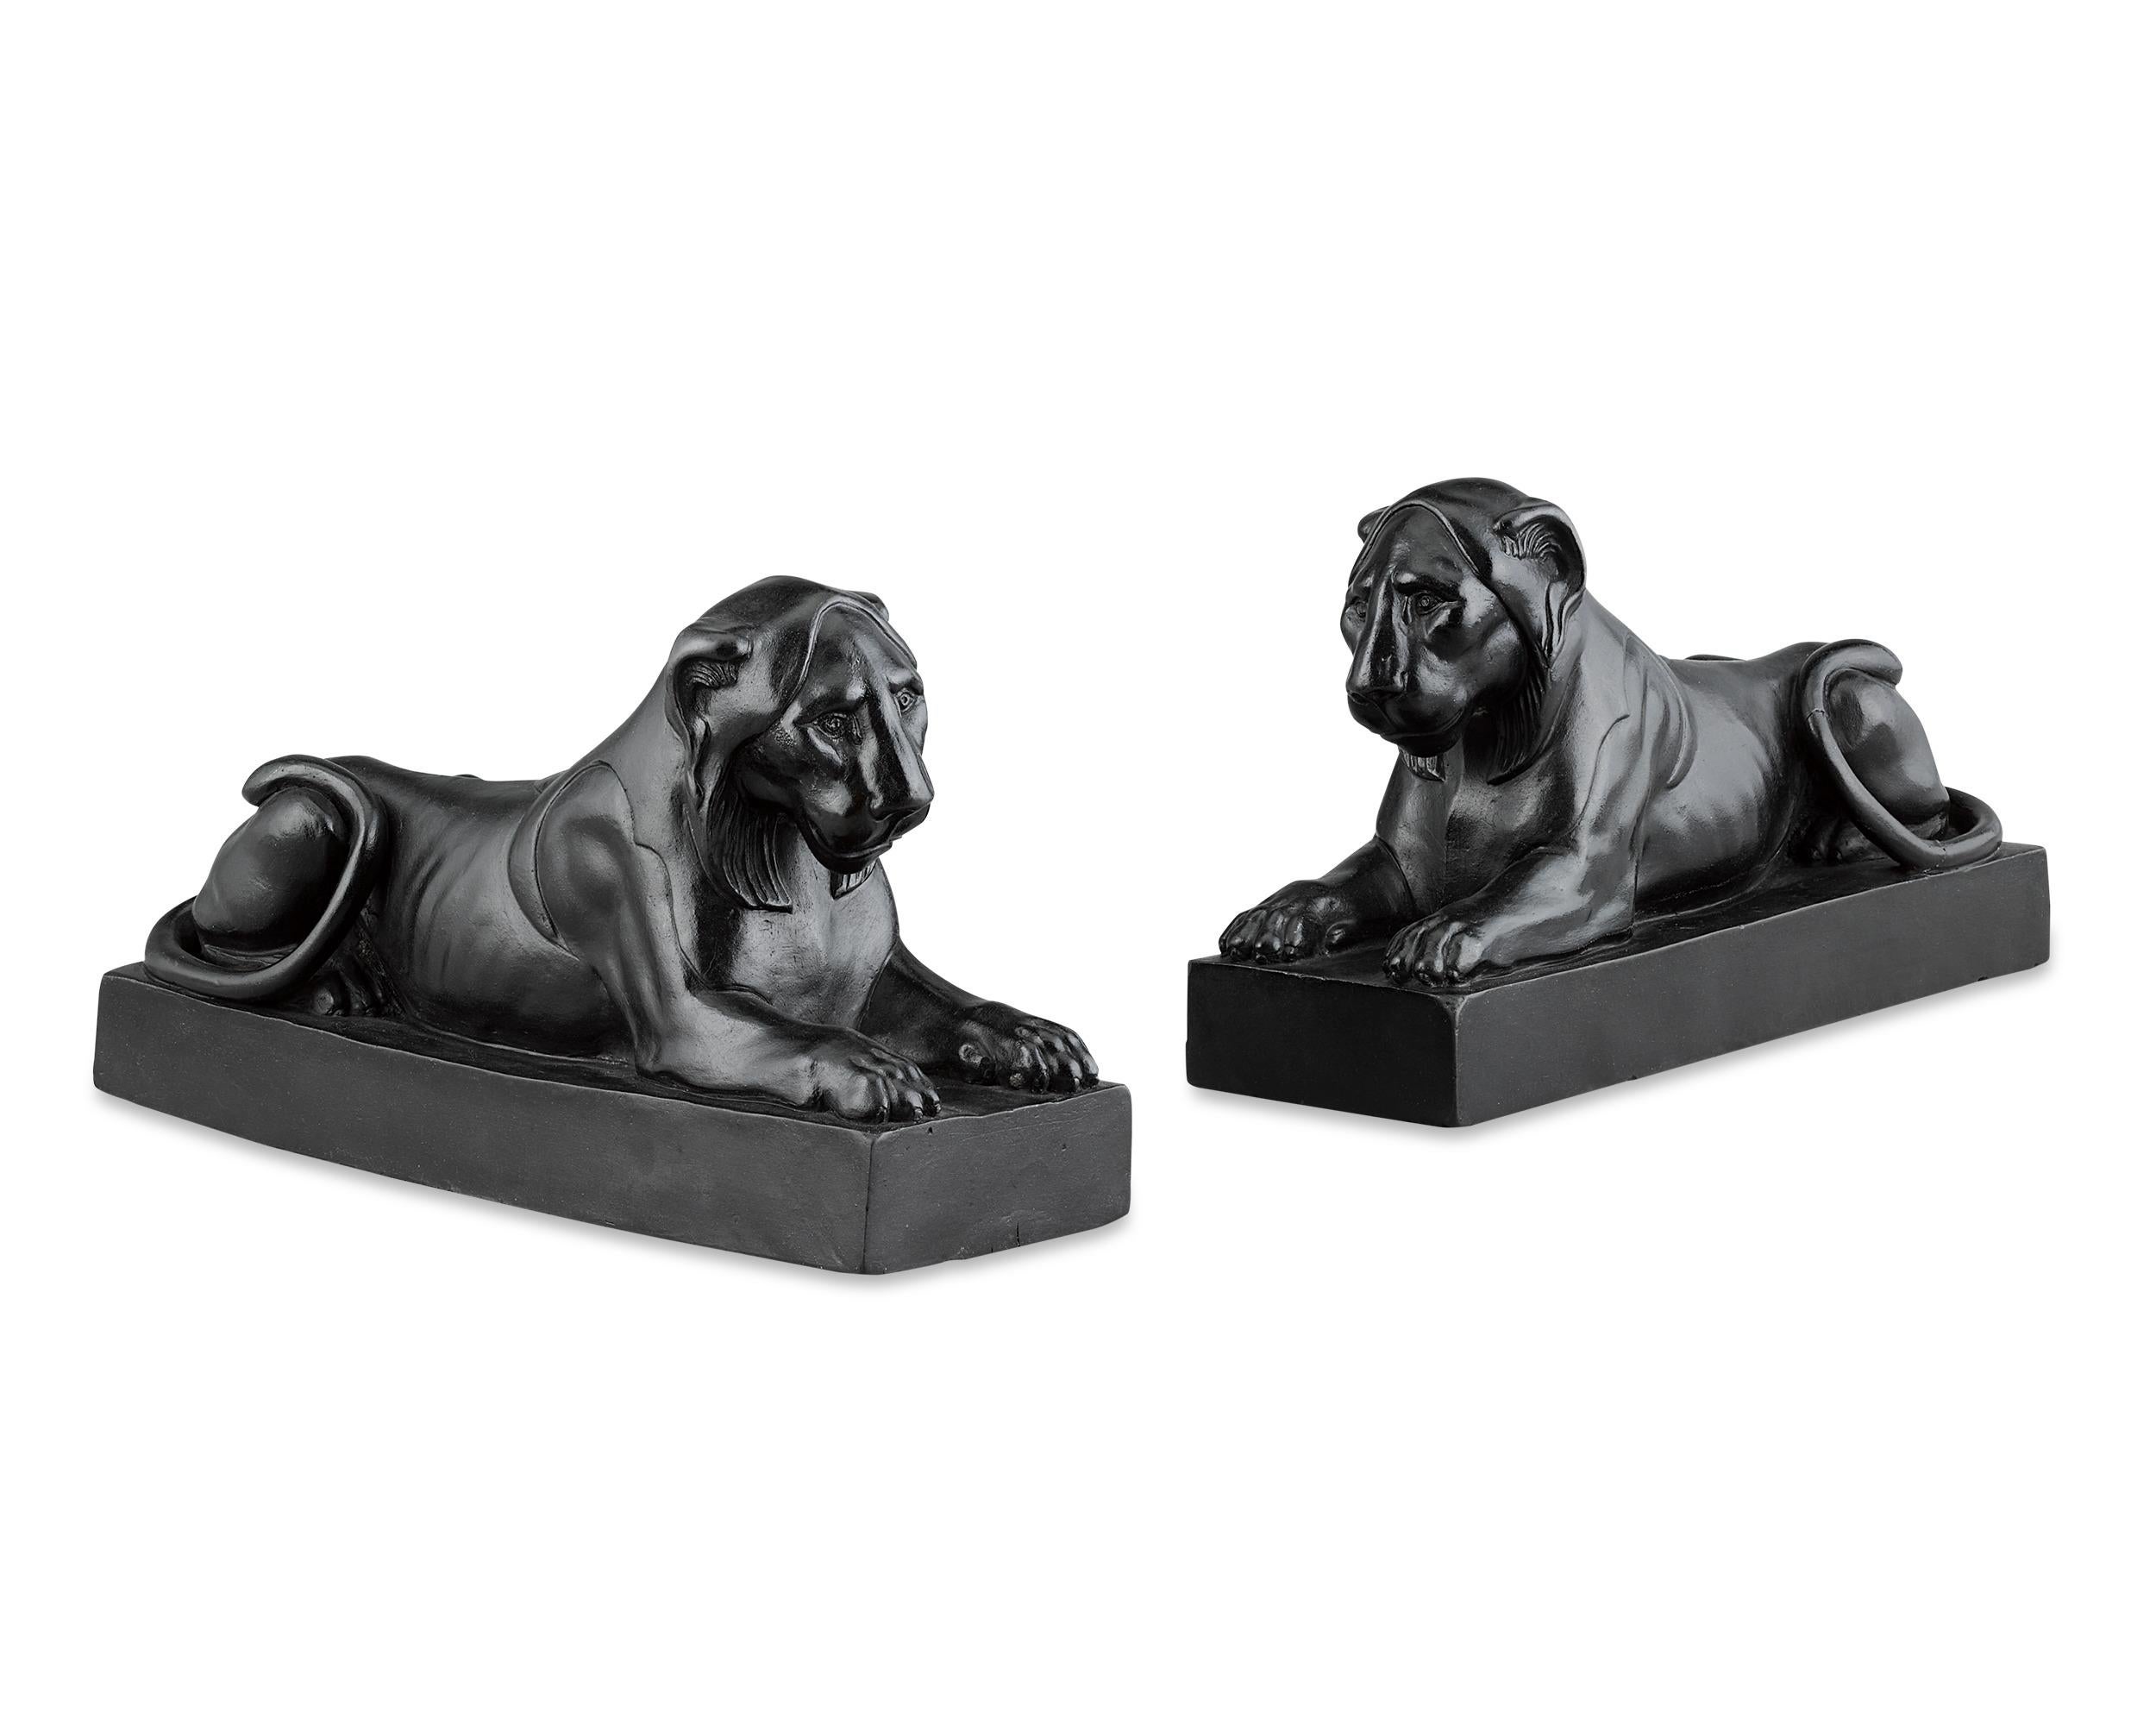 These stately and imposing lions each recline on a rectangular base, their splendidly carved faces and paws rendered in fine detail, their tails wrapped around their haunches. Caught in repose, the lions wear wise, almost pensive expressions, but